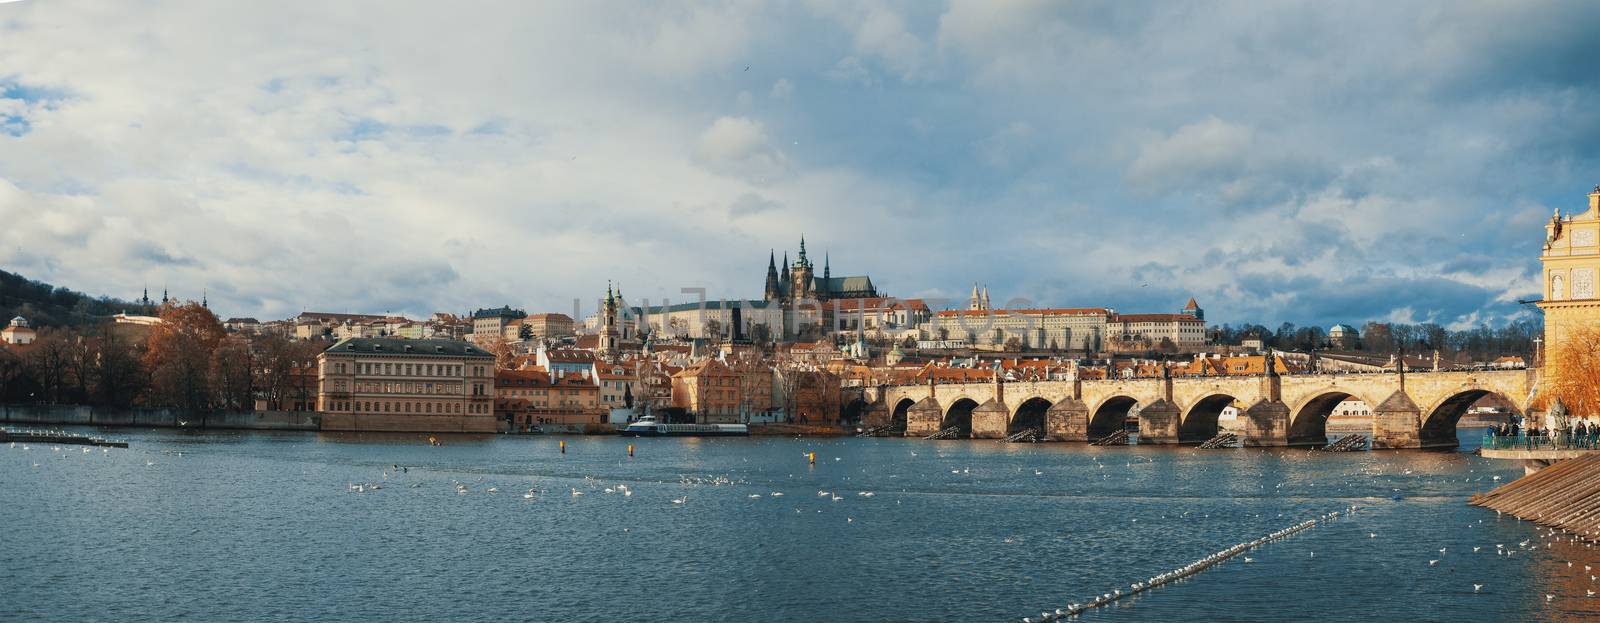 Cathedral of St. Vitus, Prague castle and the Vltava River by artush